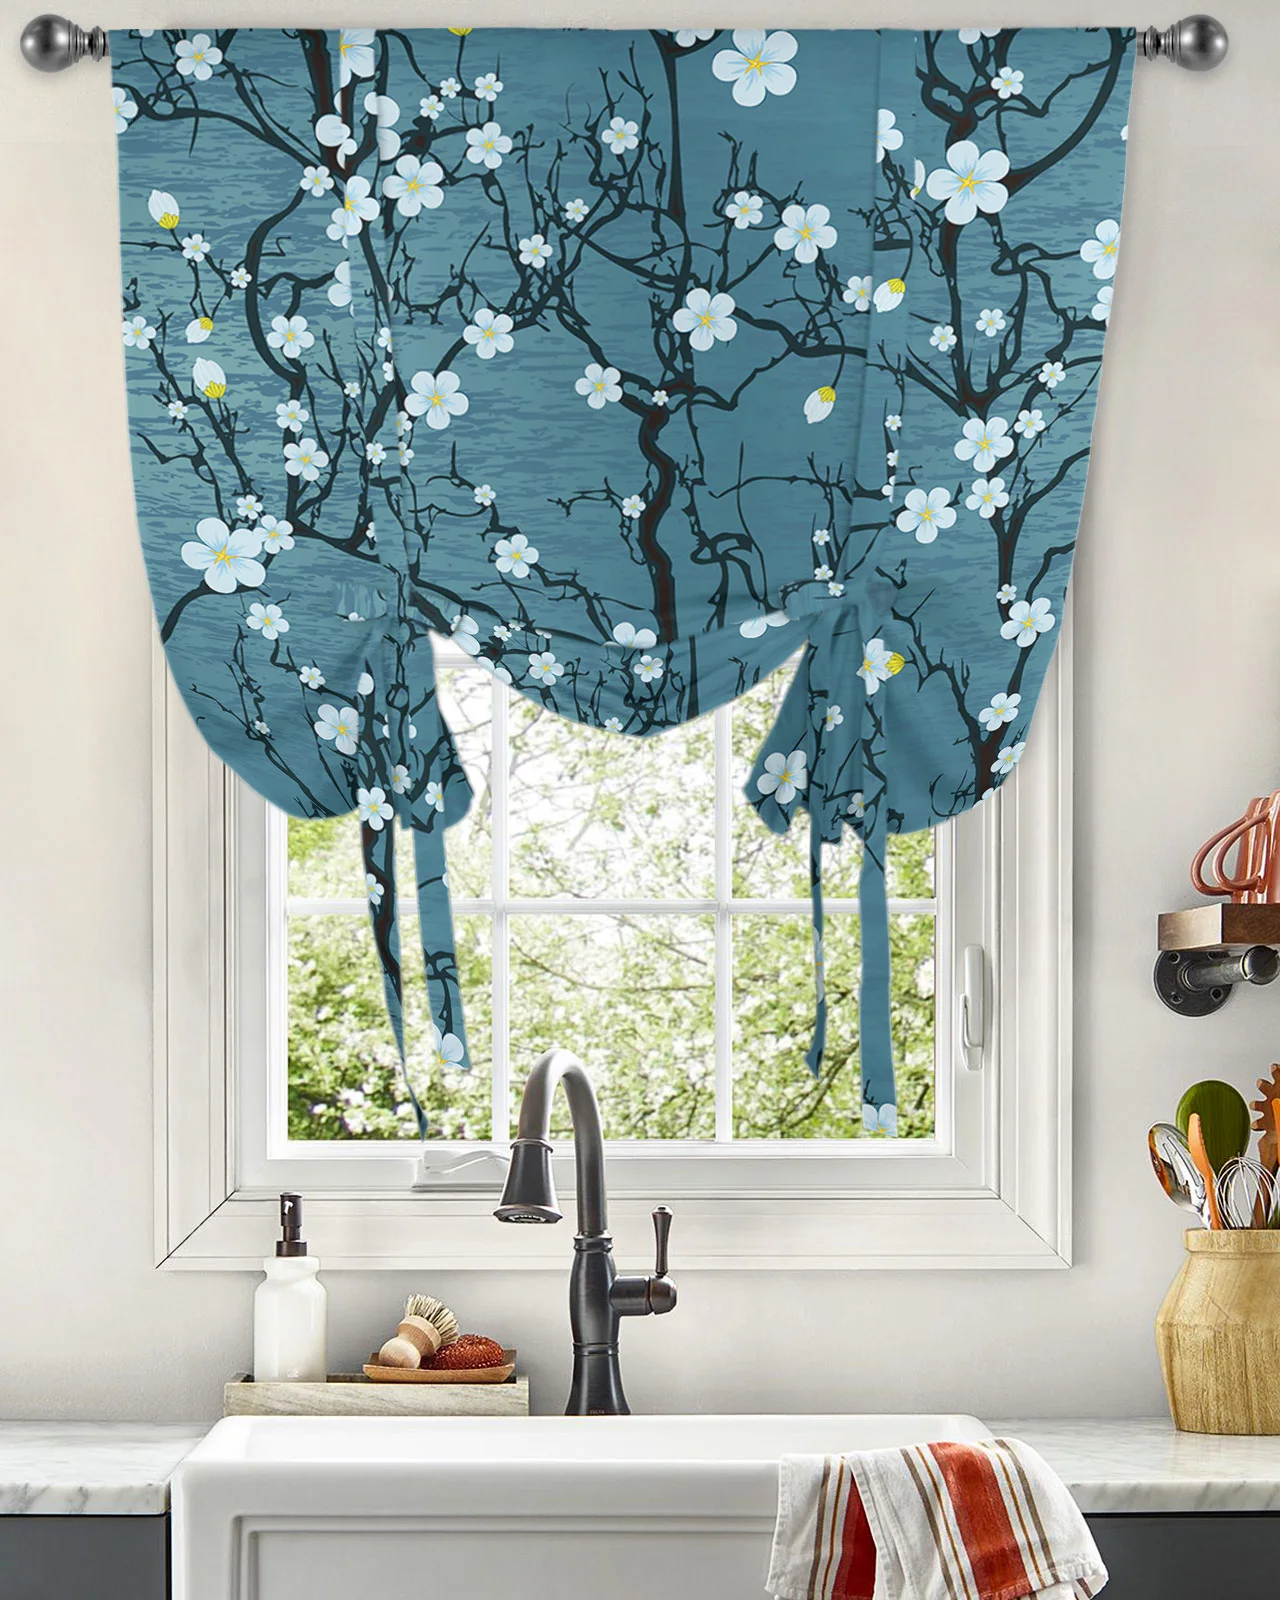 

Sakura Flower Abstract Water Wave Window Curtain for Living Room Bedroom Balcony Cafe Kitchen Tie-up Roman Curtain